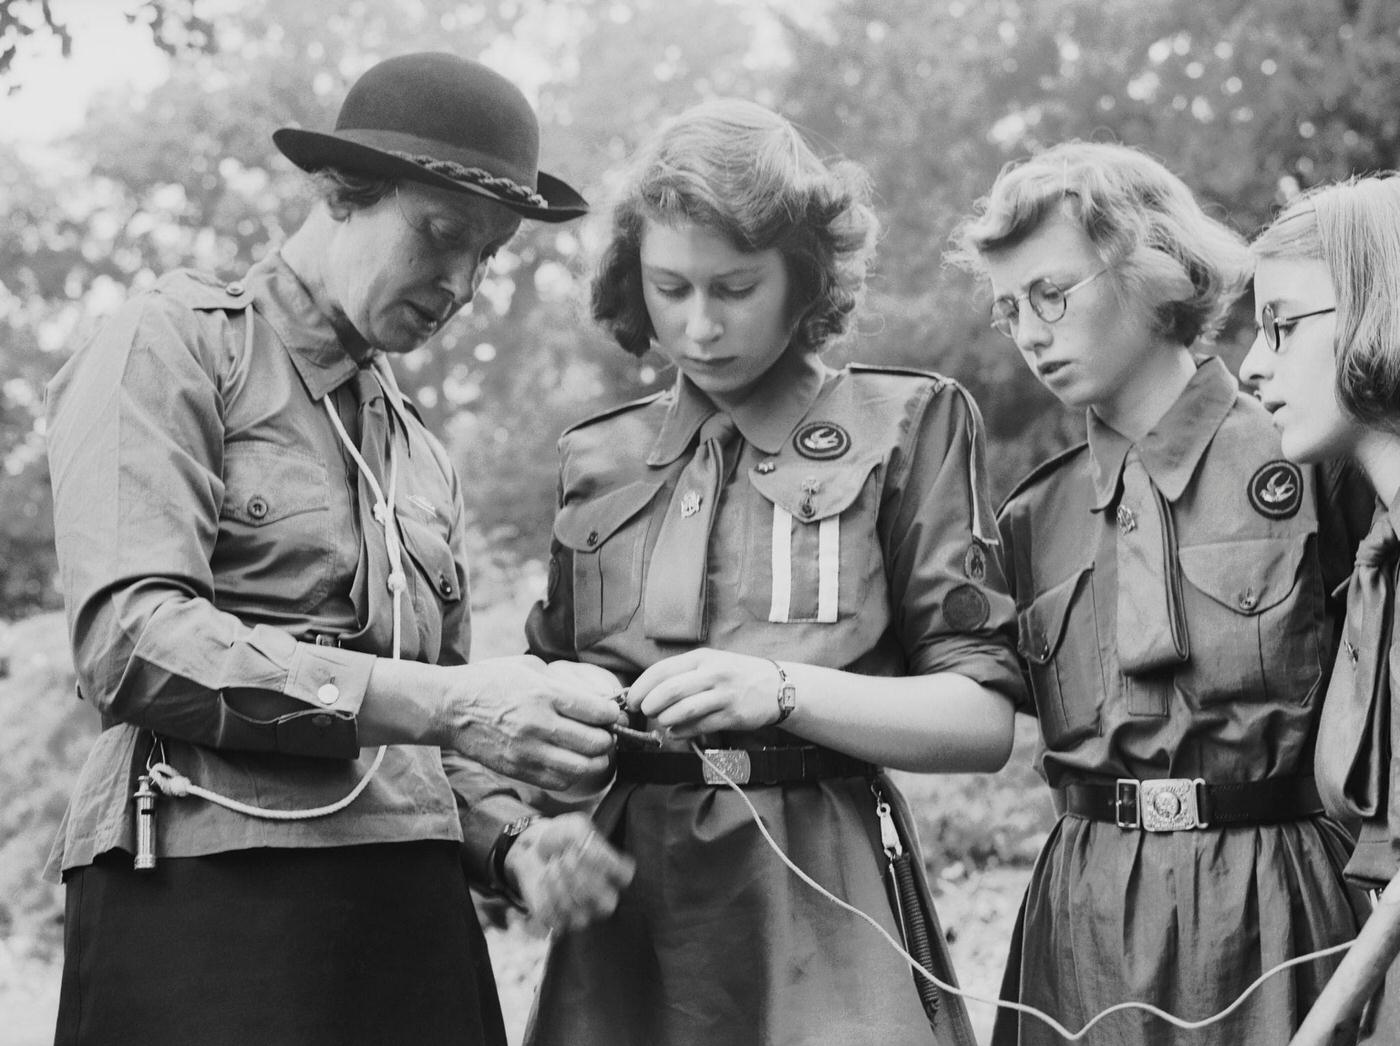 Princess Elizabeth learns to tie a knot with the girl guides in Frogmore, Windsor, England on April 11, 1942.